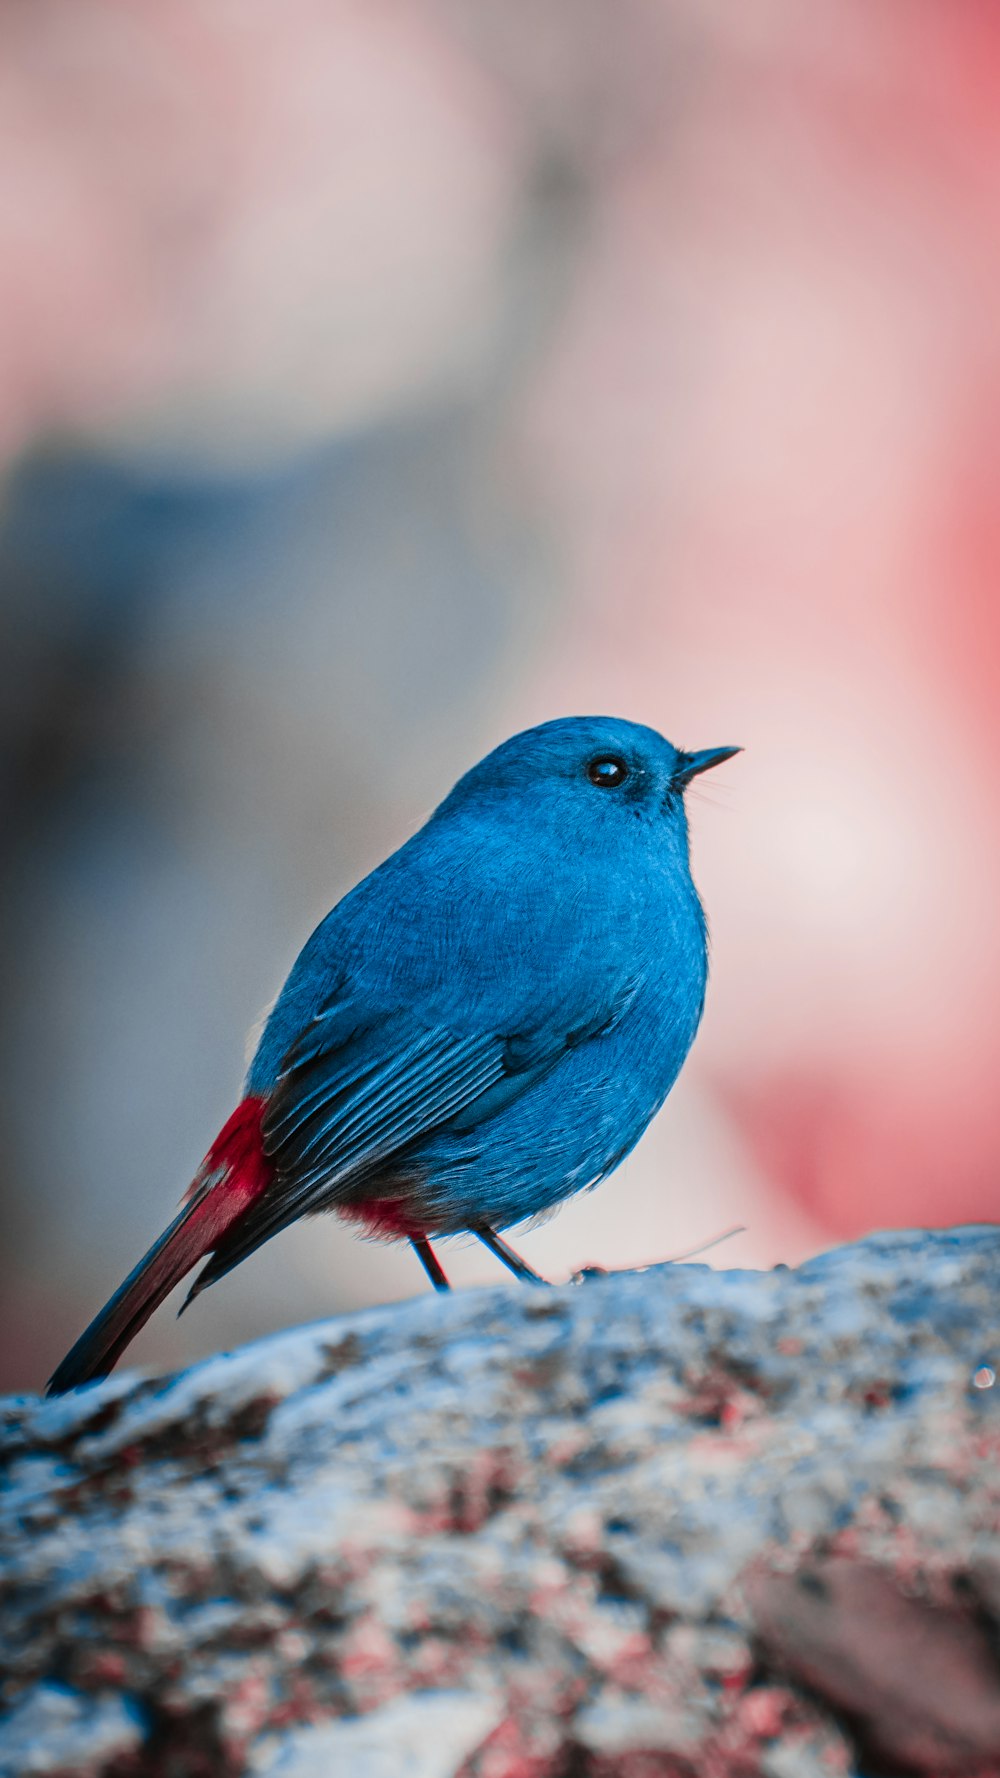 blue and red bird during daytime